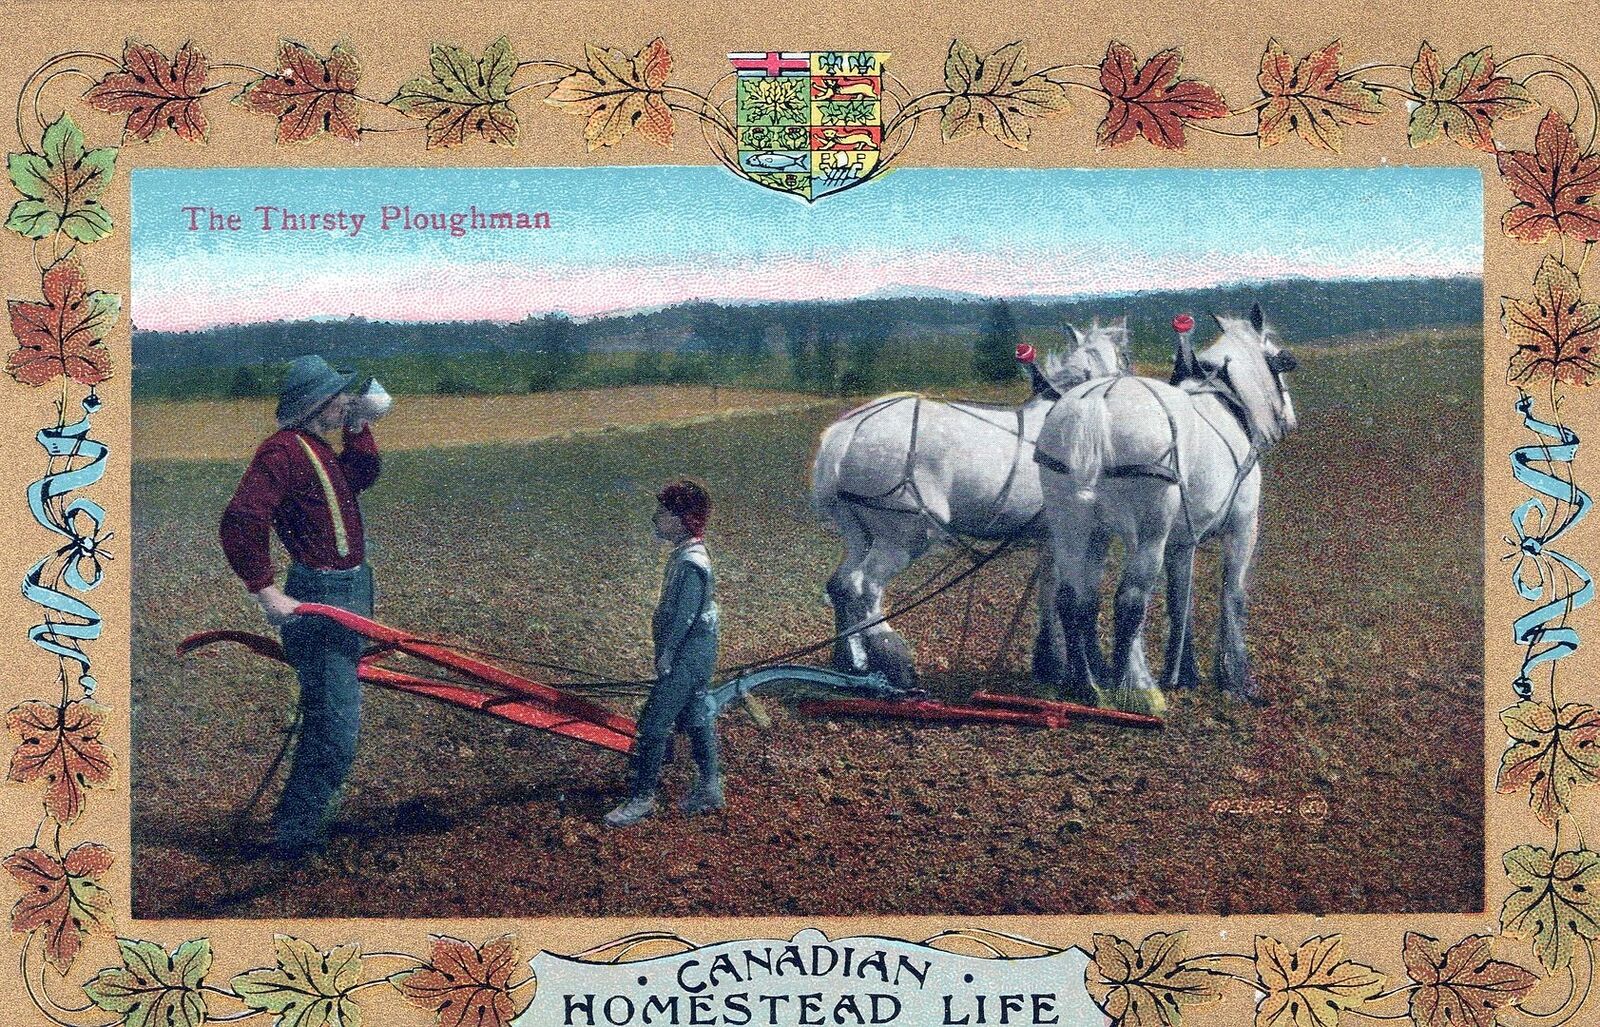 CANADA - The Thirsty Ploughman Canadian Homestead Life Postcard